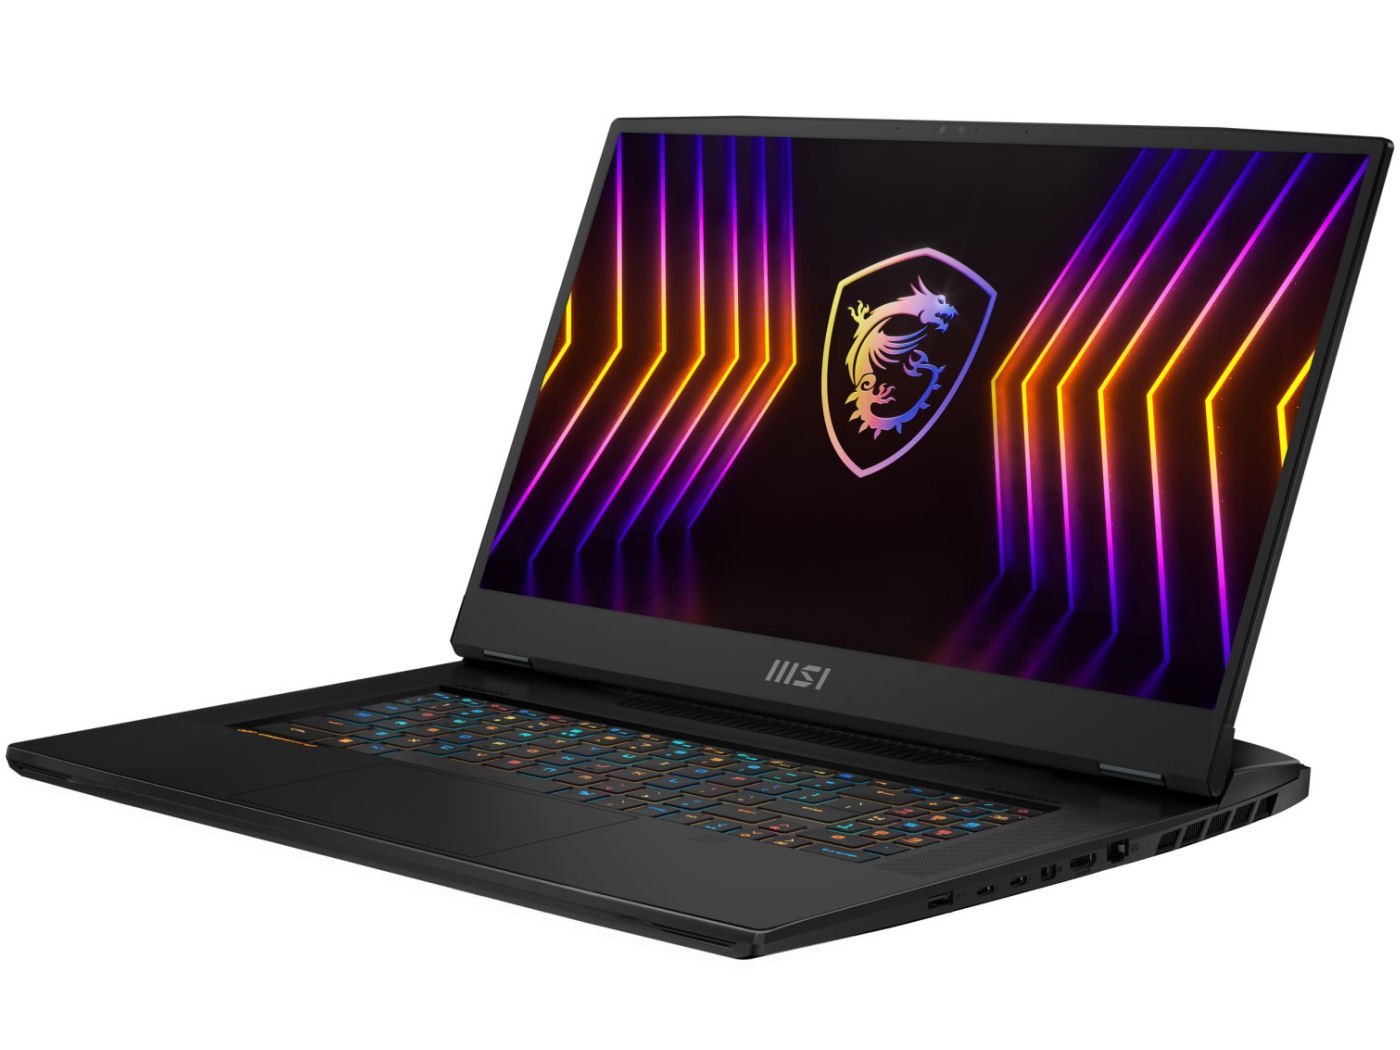 MSI Titan GT77 12UHS 4K: Sizzling rod with RTX 3080 Ti delivers high performance